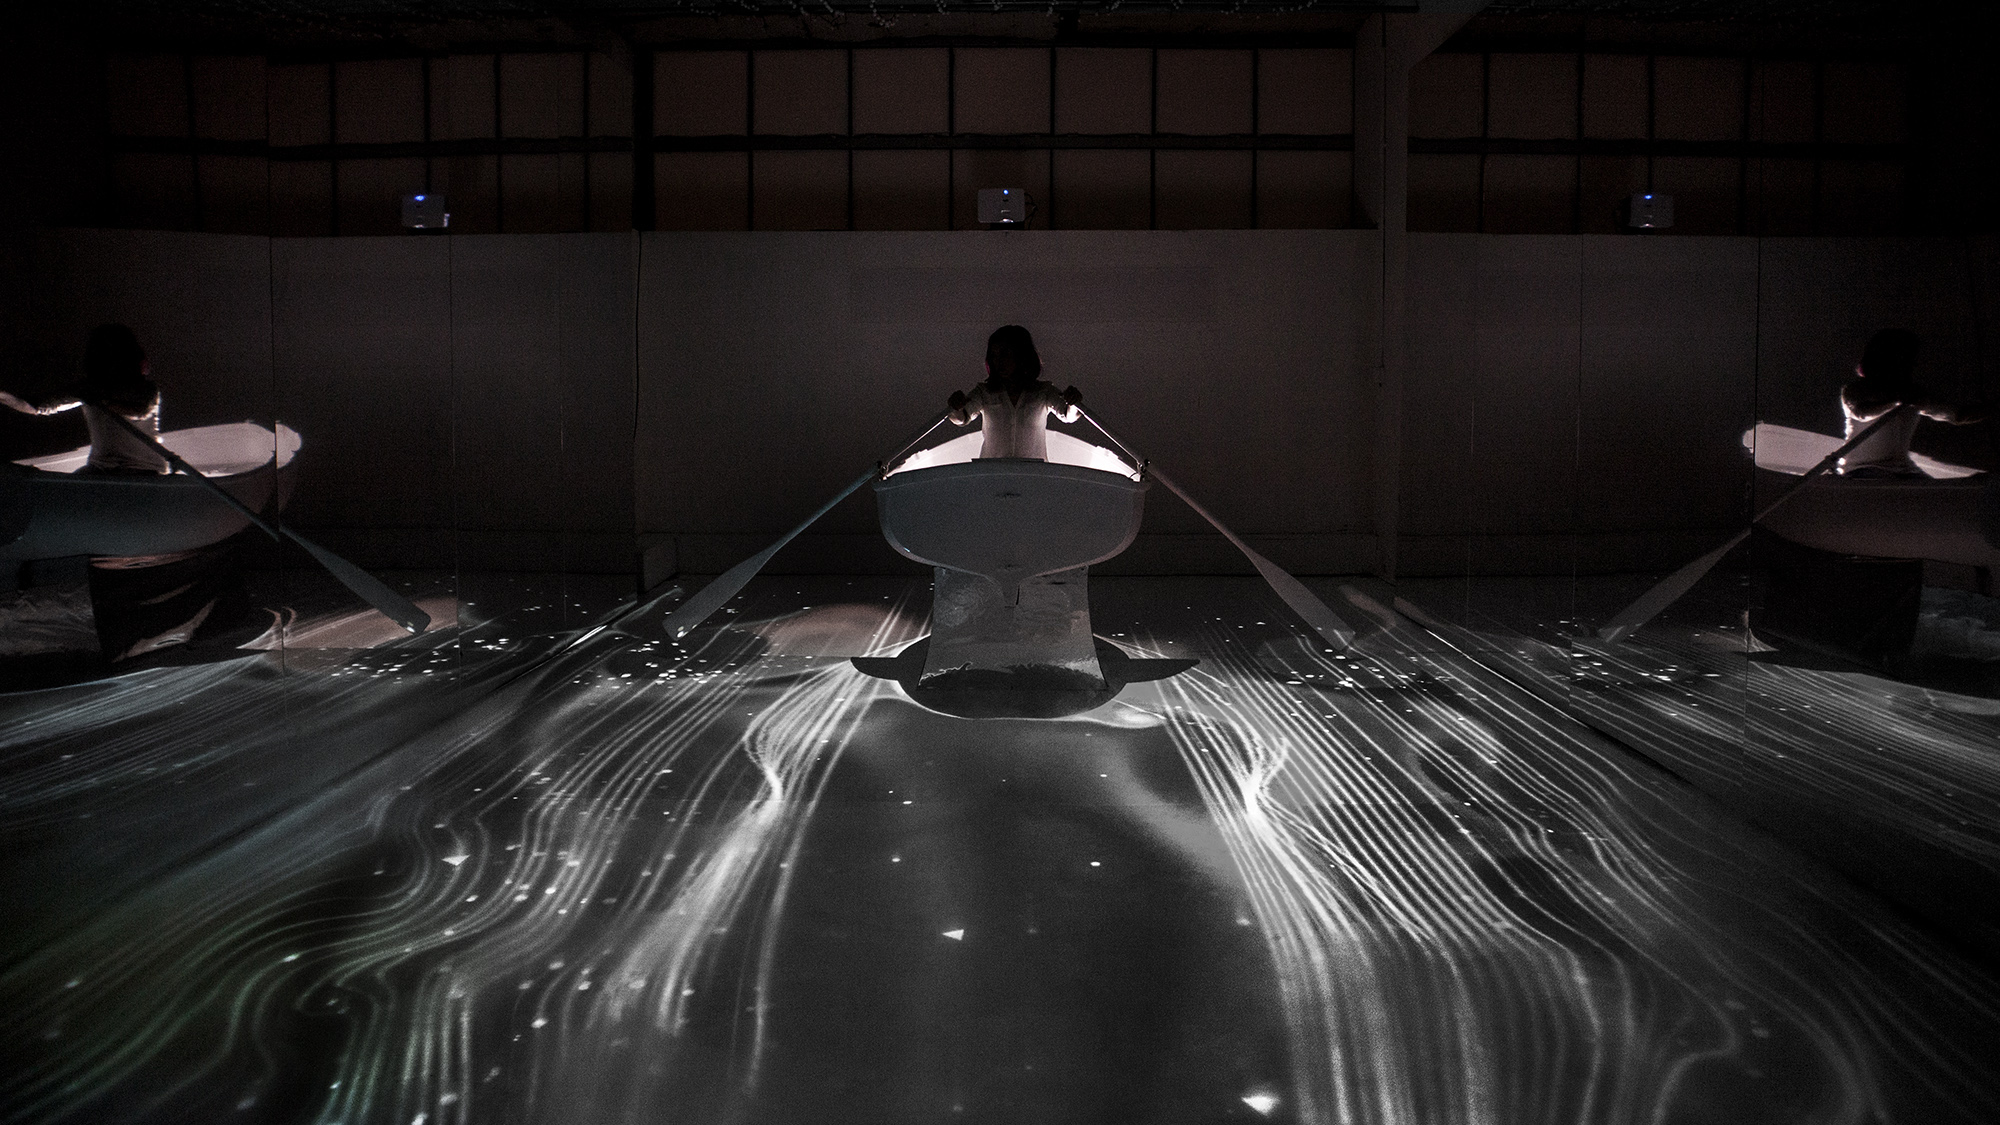 image of woman in rowboat interacting with digital stars and water projections all around her